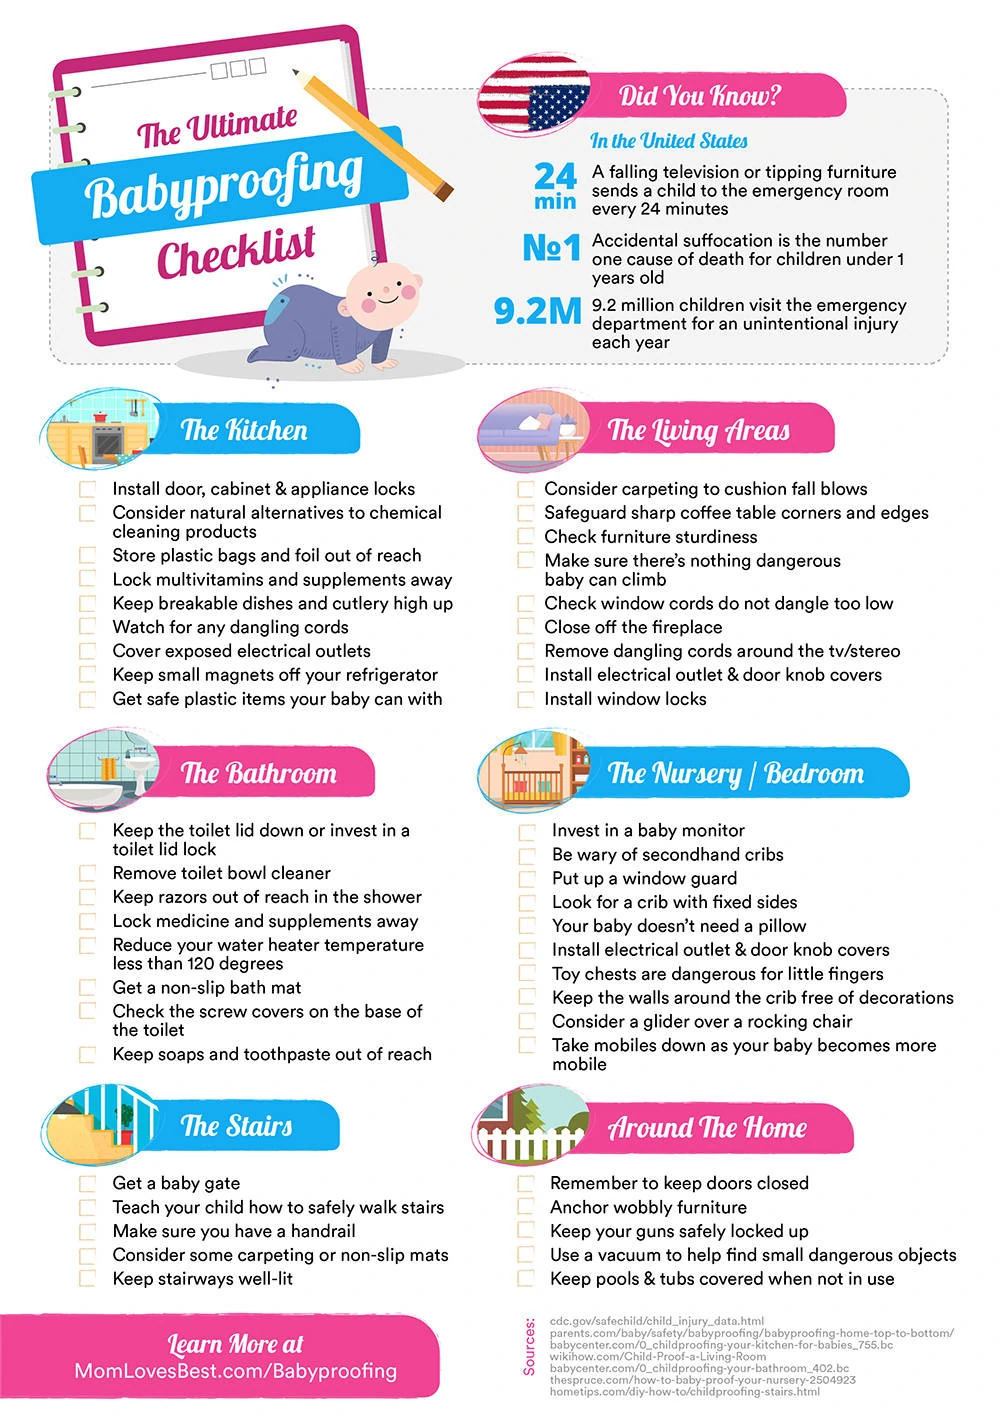 Are you worried about if your new baby will be safe in your home? Click here to get a free checklist to help you babyproof every room in your house. #baby #newborn #babyproofing #childproofing #kids #momlife